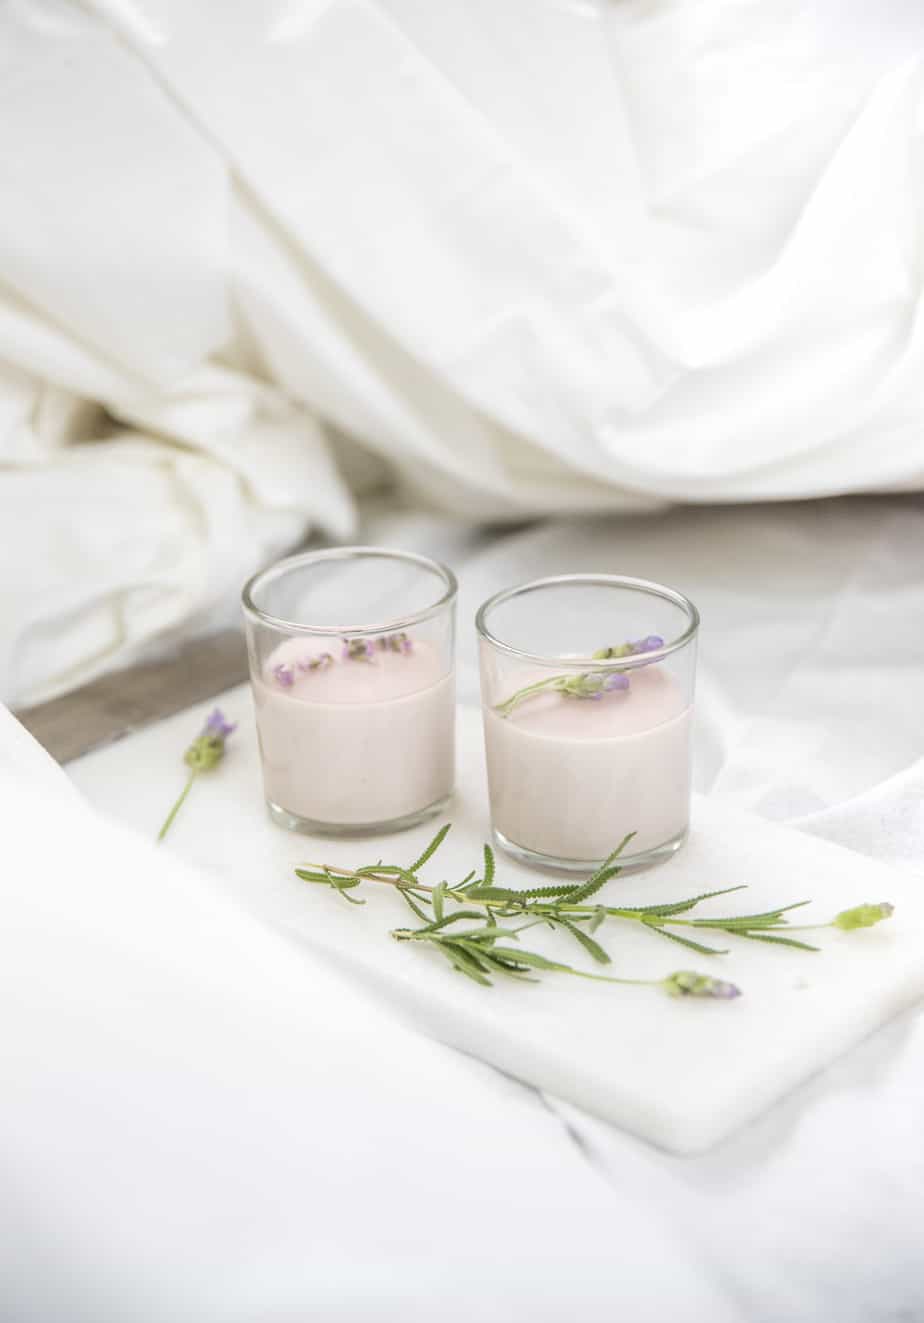 Two lavender panna cottas in serving glasses with lavender flowers.